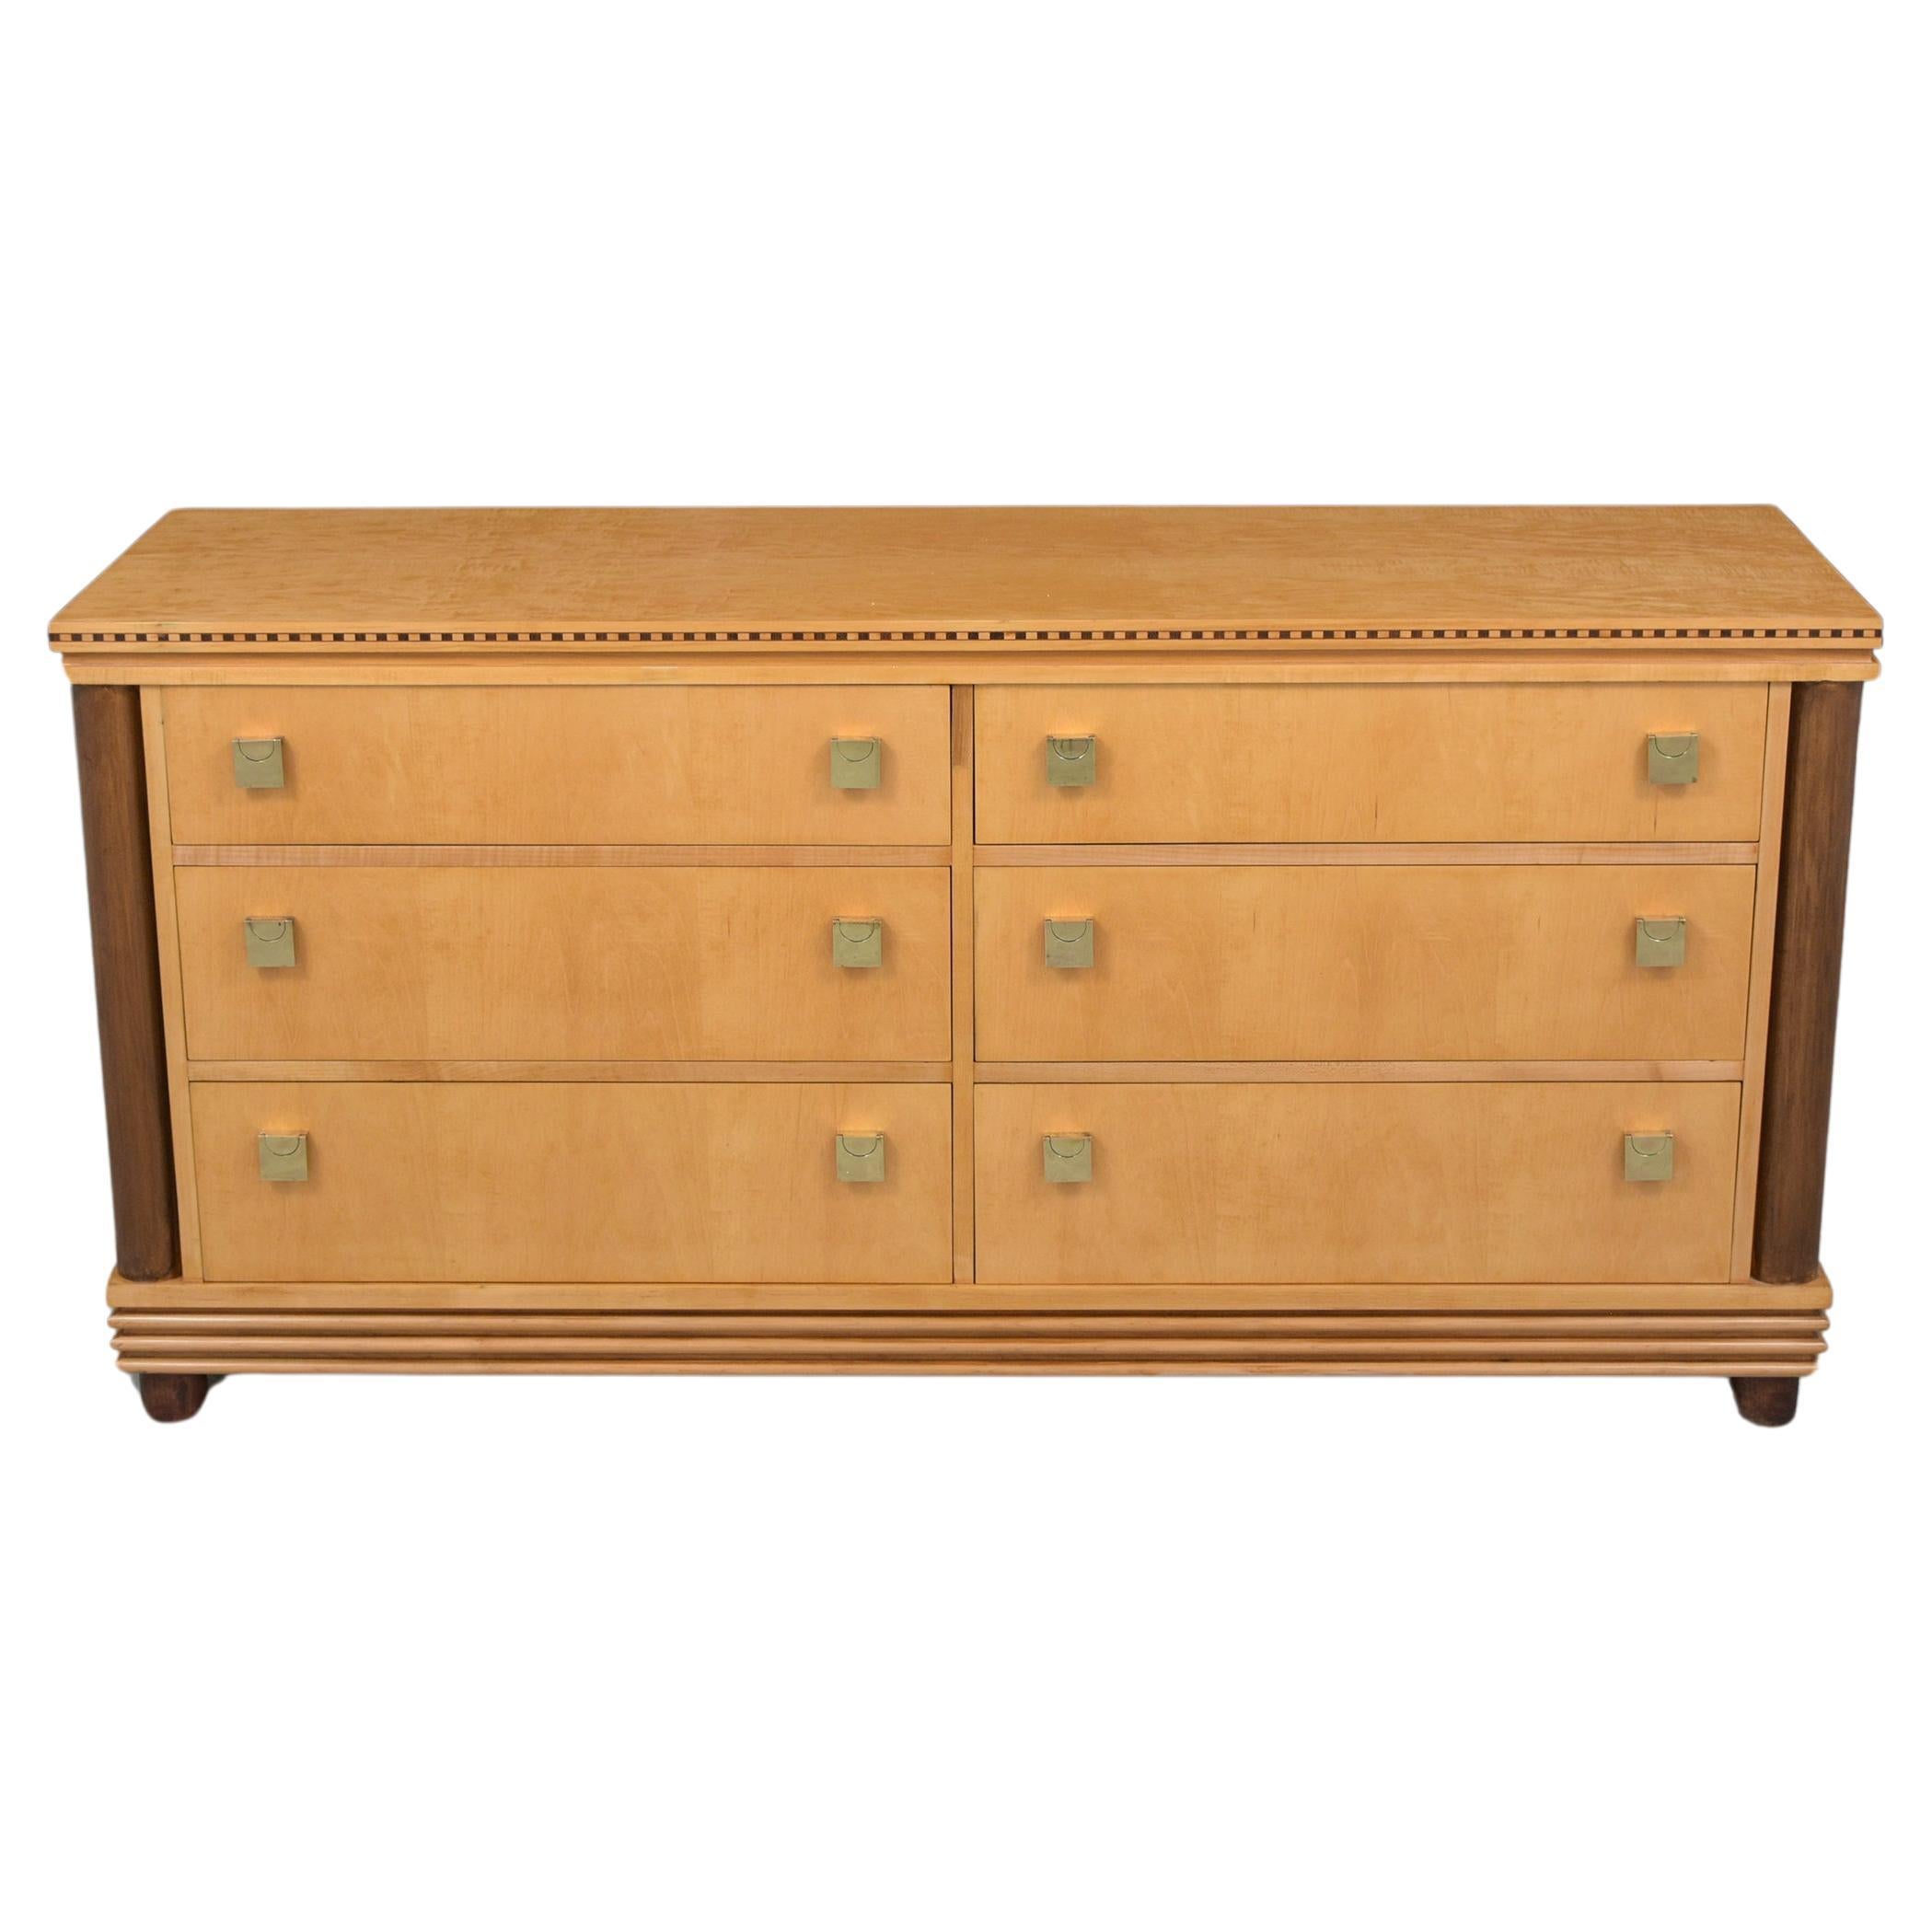 Vintage Birch Wood Mid-Century Chest of Drawers: Timeless Elegance Restored